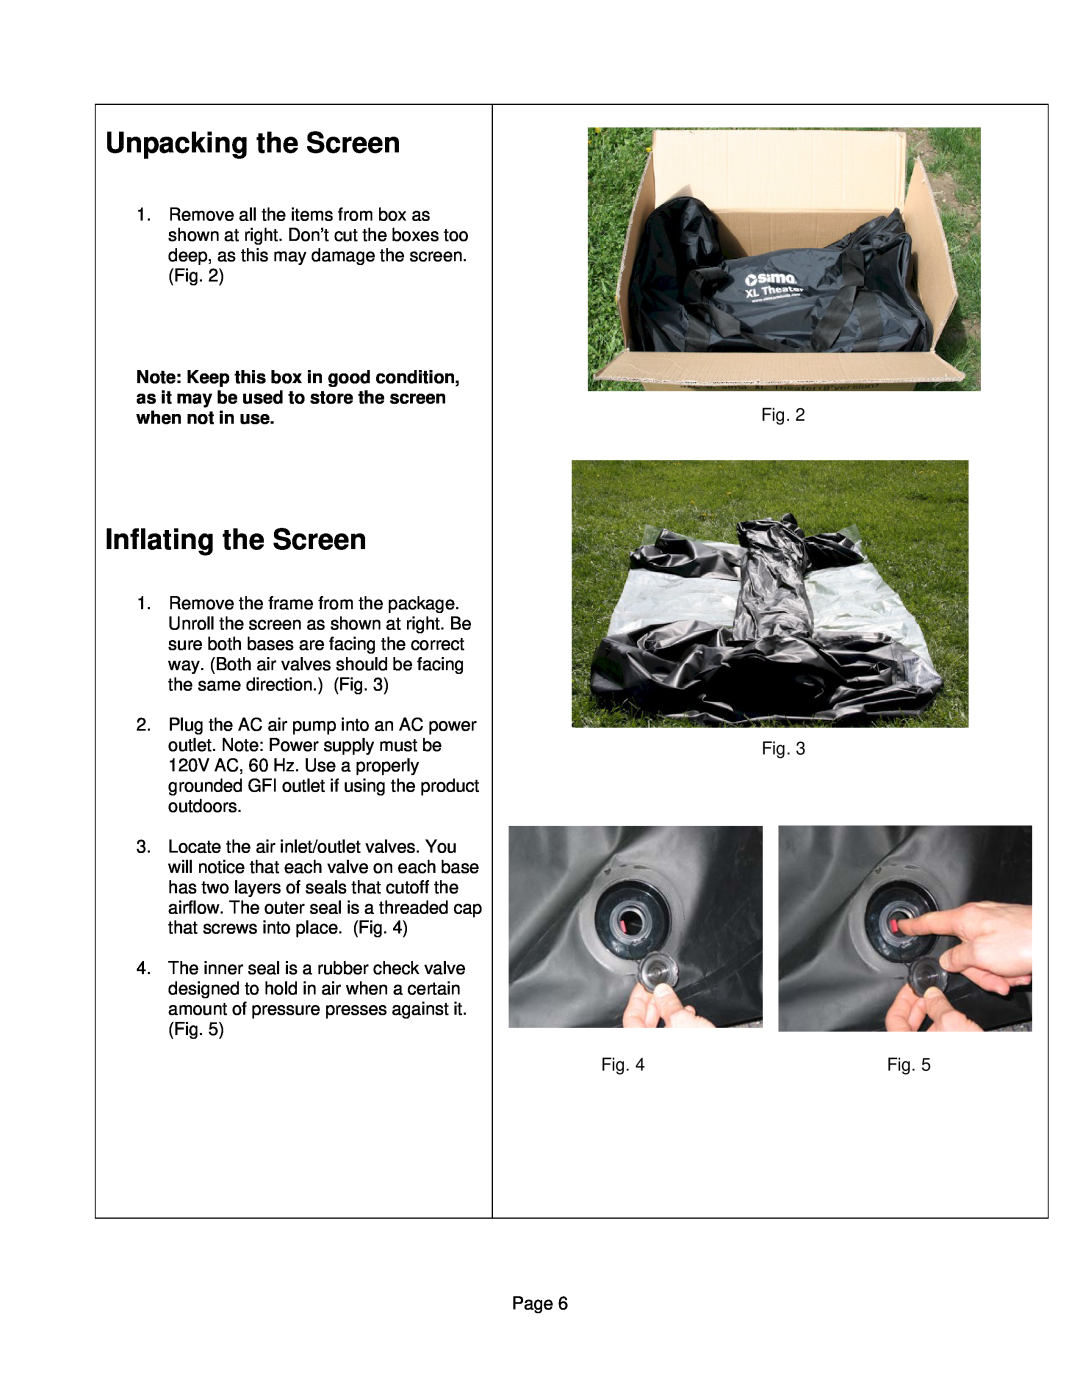 Sima Products XL-12, XL-8 user manual Unpacking the Screen, Inflating the Screen 